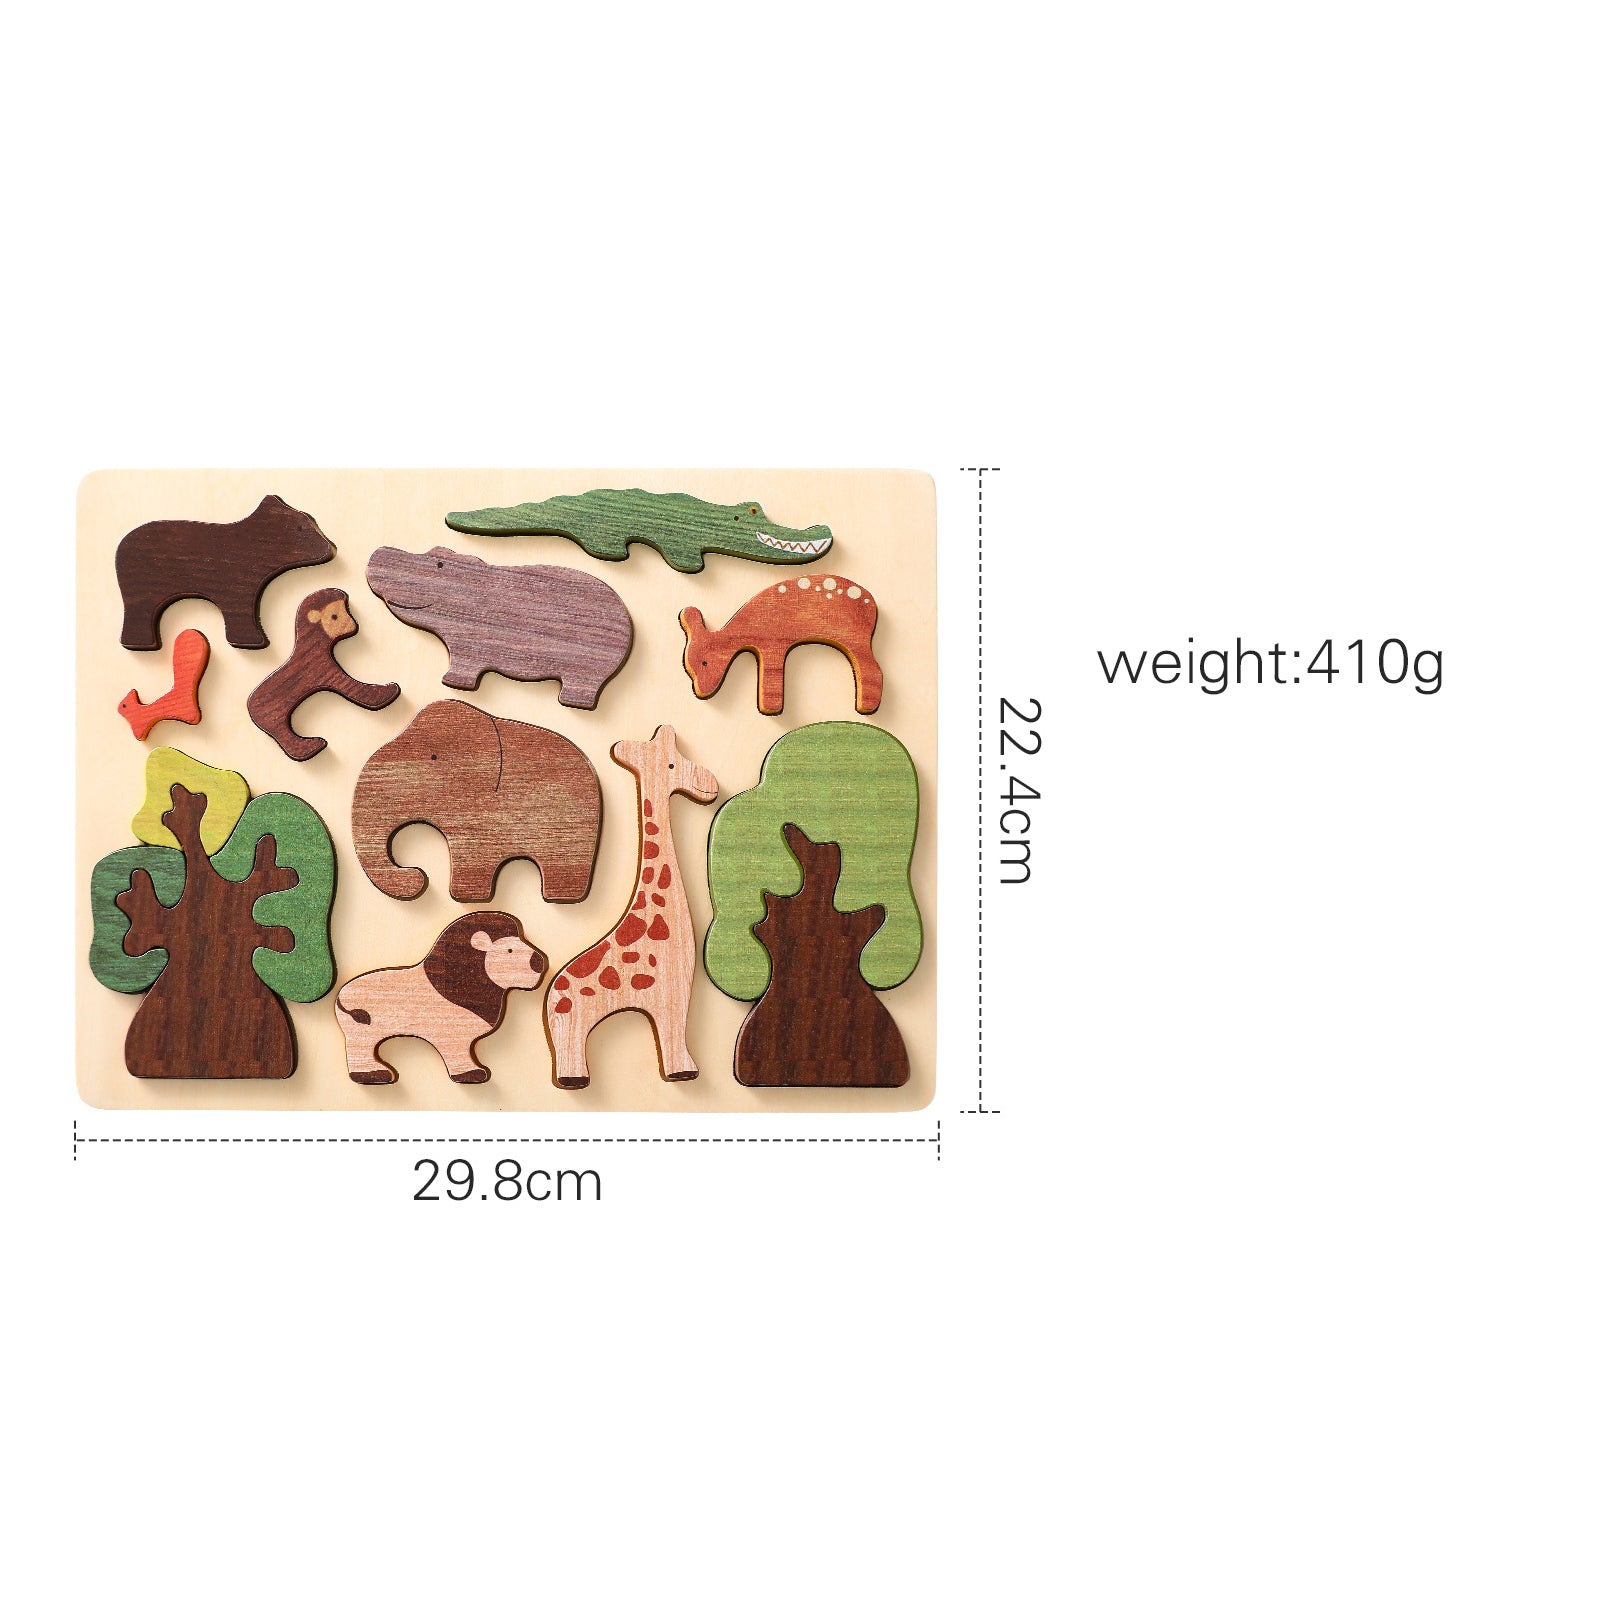 Wooden Forest Animal Puzzle